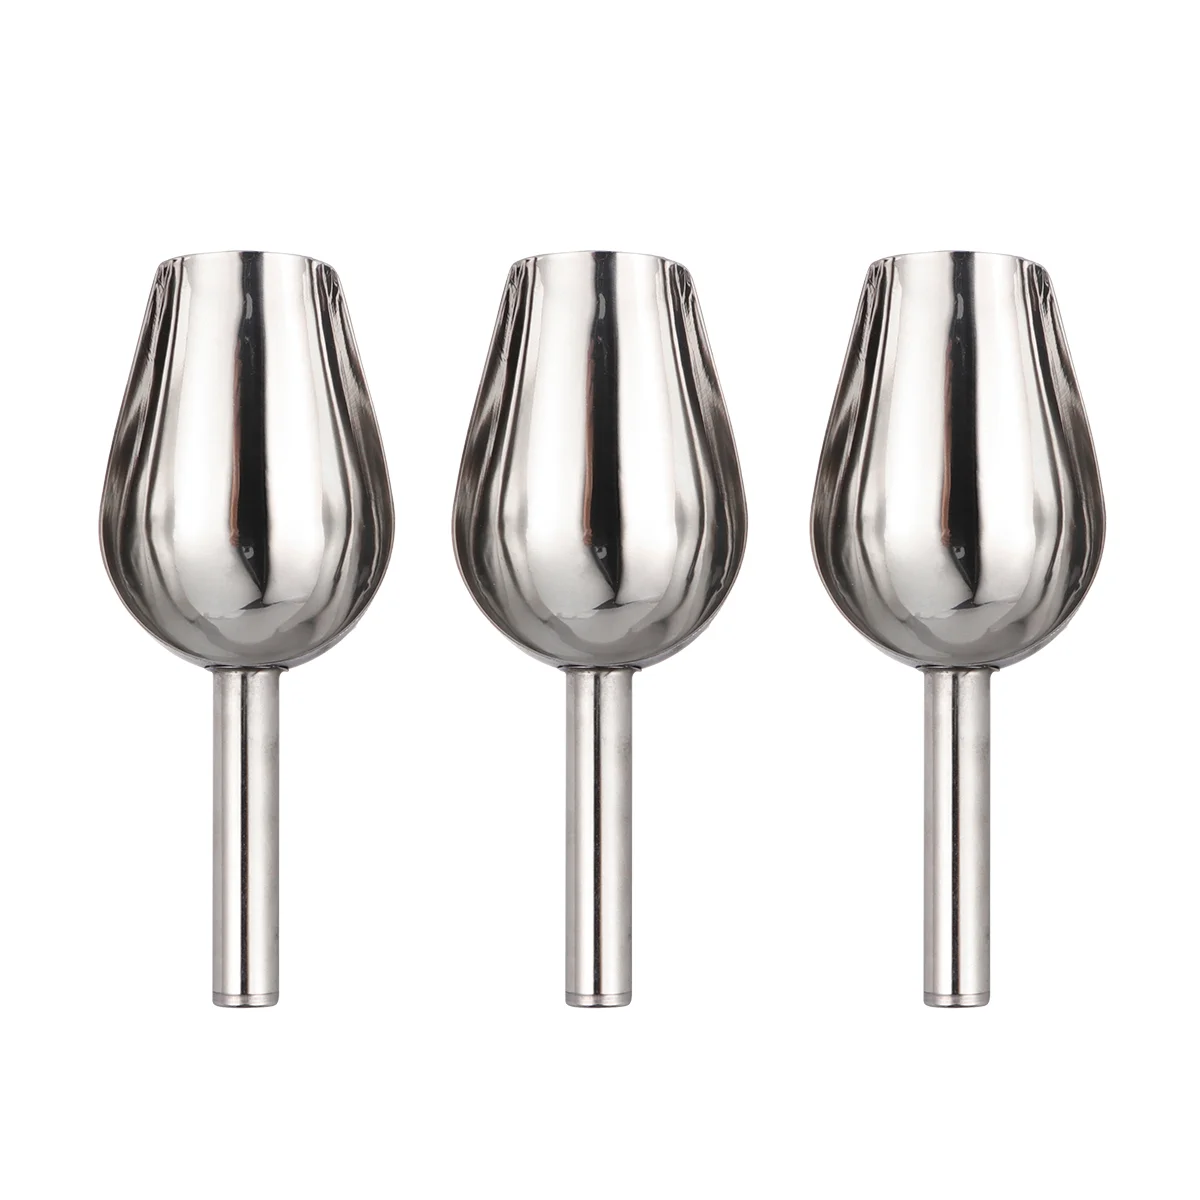 

3pcs Kitchen Scoops Stainless Steel Scoop Bath Scoops Candy Sugar Scoop for Popcorn Candy Flour Sugar Pantry Plastic spoons